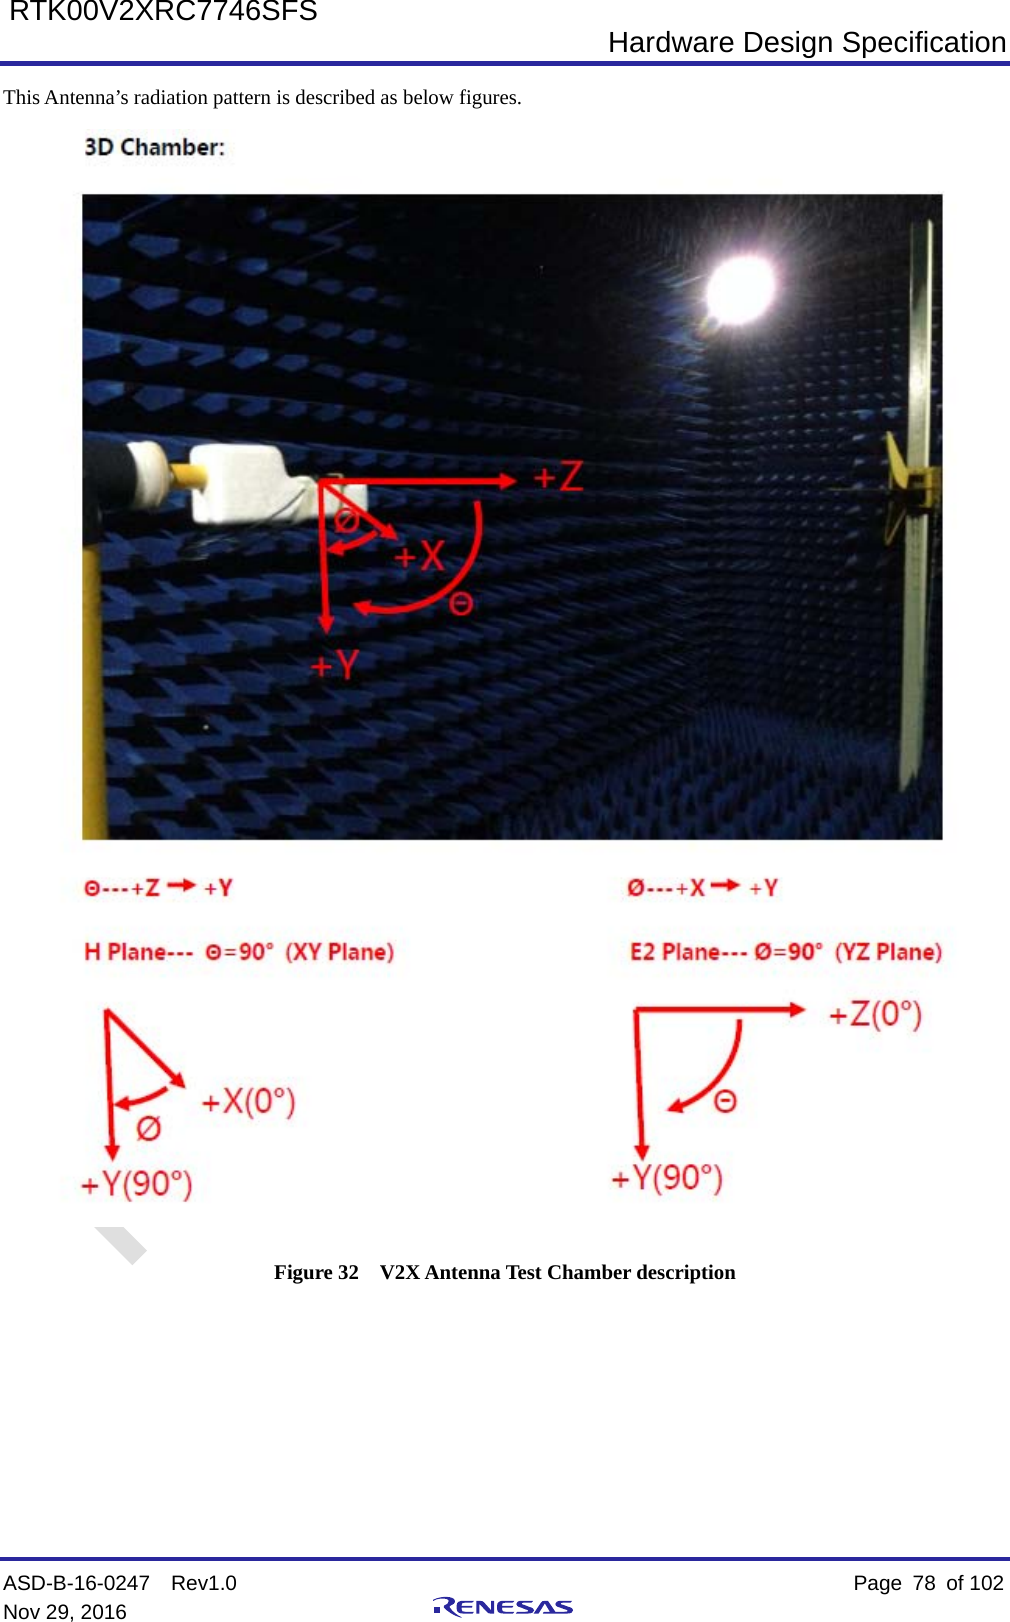  Hardware Design Specification ASD-B-16-0247  Rev1.0    Page  78 of 102 Nov 29, 2016     RTK00V2XRC7746SFS This Antenna’s radiation pattern is described as below figures.  Figure 32  V2X Antenna Test Chamber description 